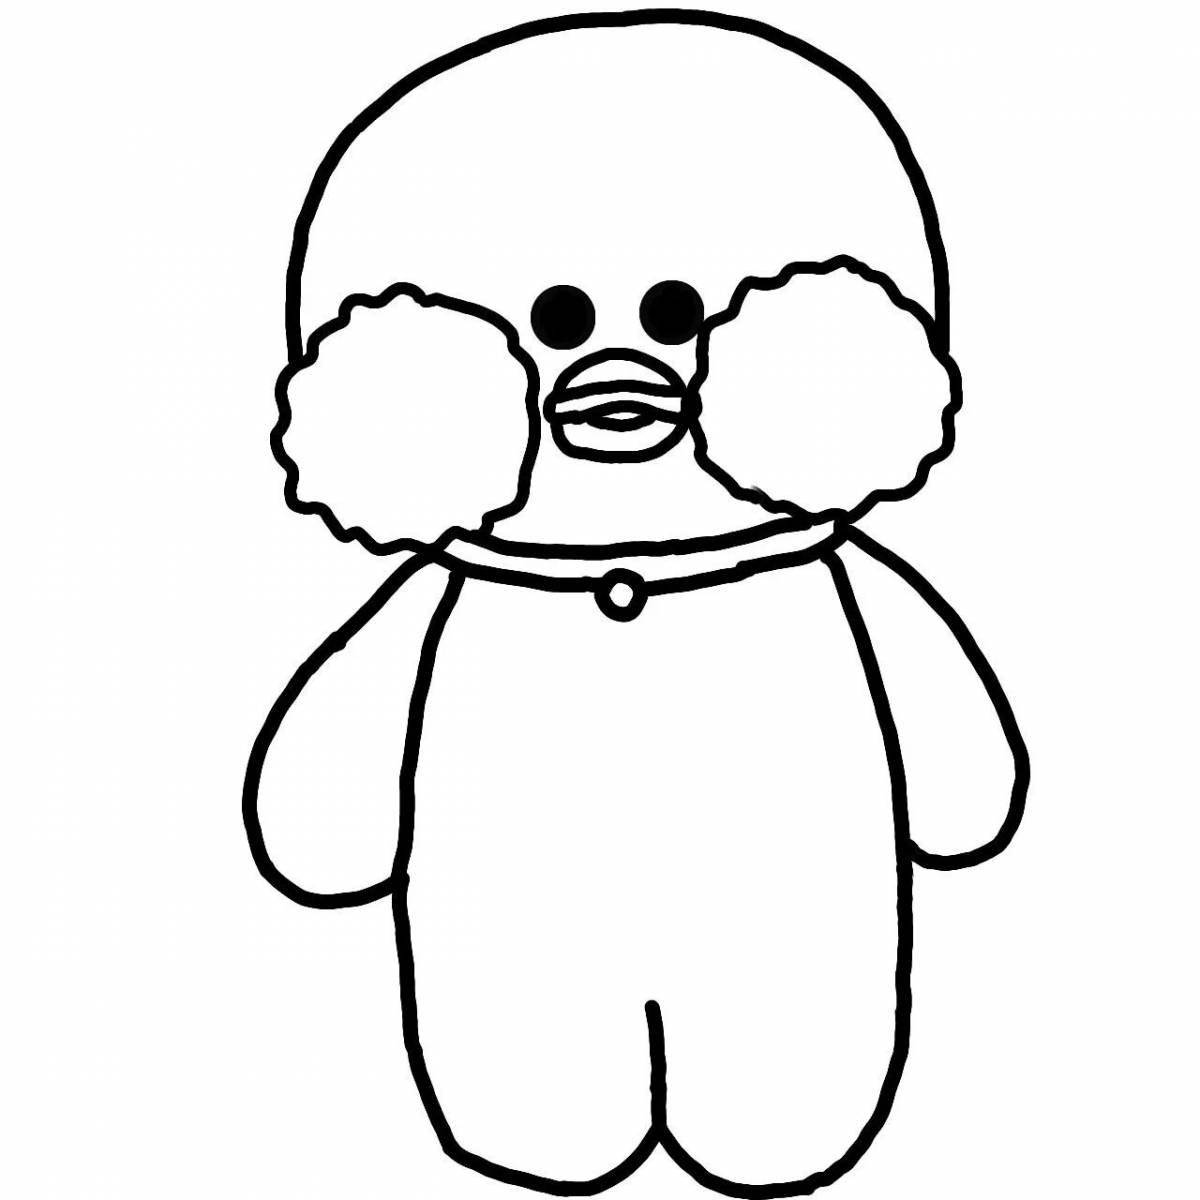 Cute dressed up duck coloring book